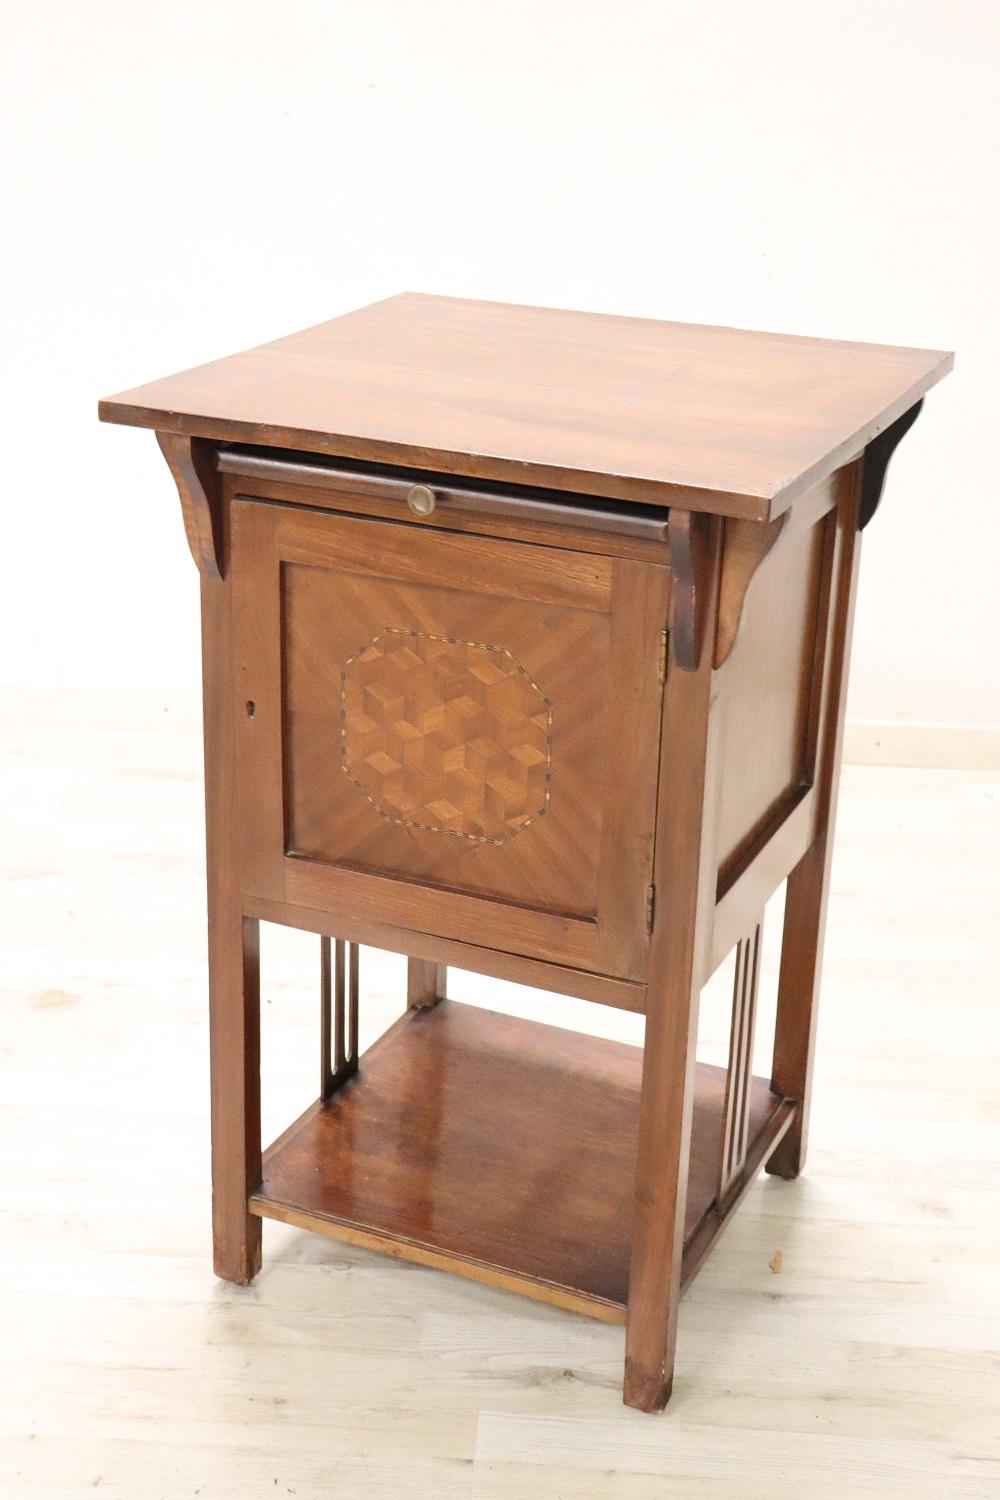 Lovely italian of the period art nouveau side table. The table with a inlaid decoration on the front. Look at every little detail of this beautiful side table. Perfect conditions.